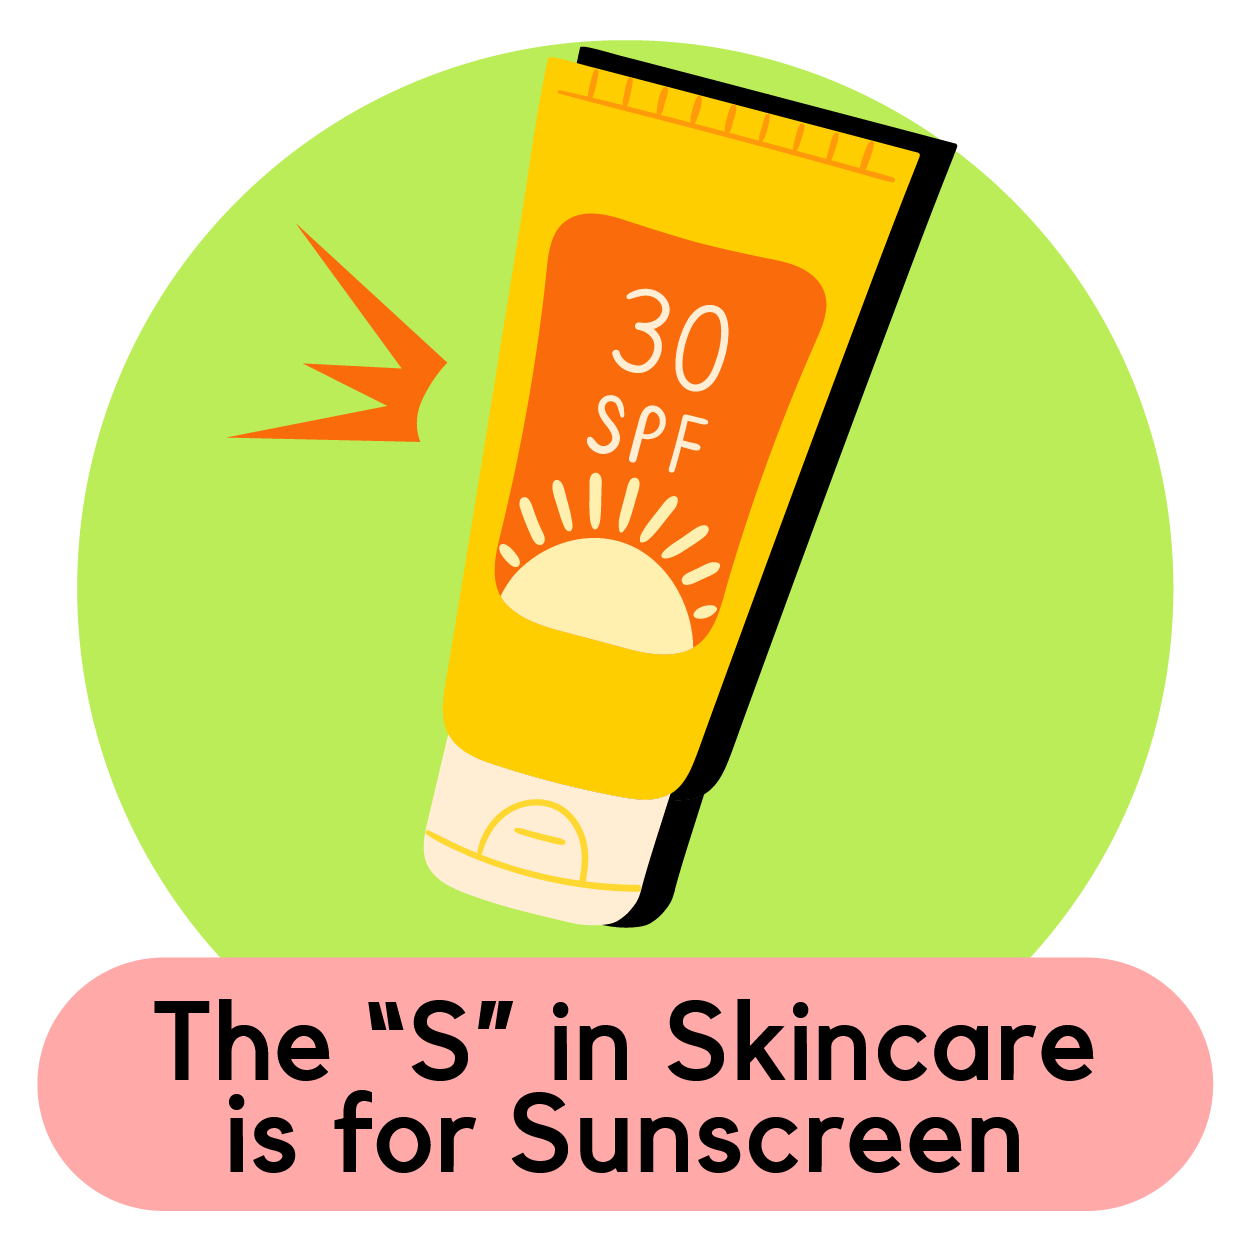 The "S" in Skincare is for Sunscreen